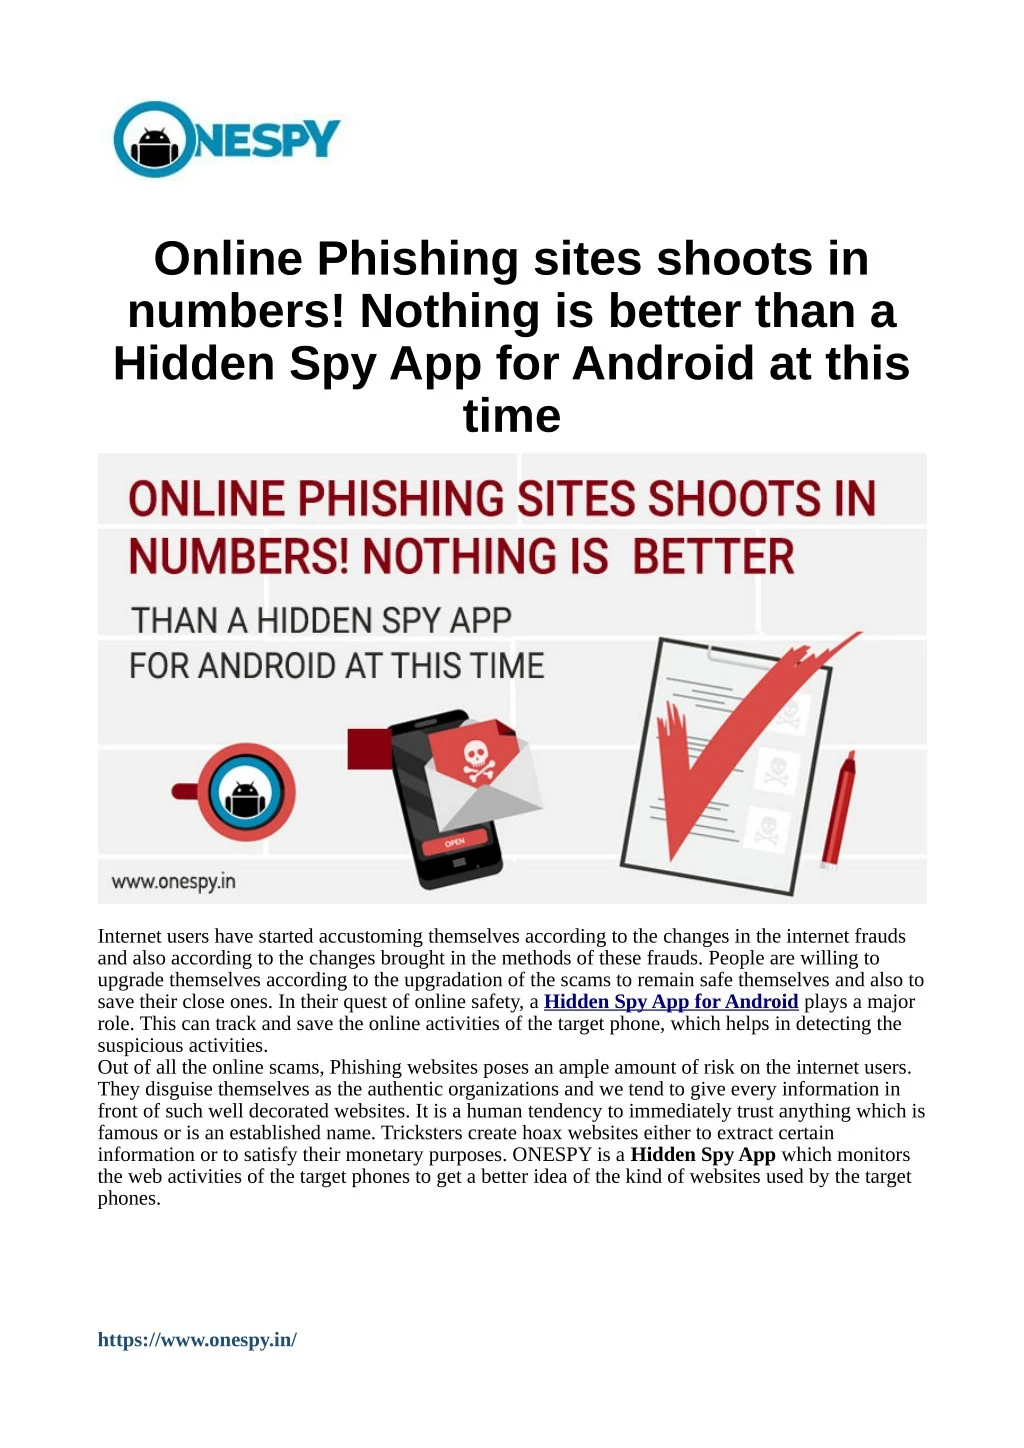 online phishing sites shoots in numbers nothing